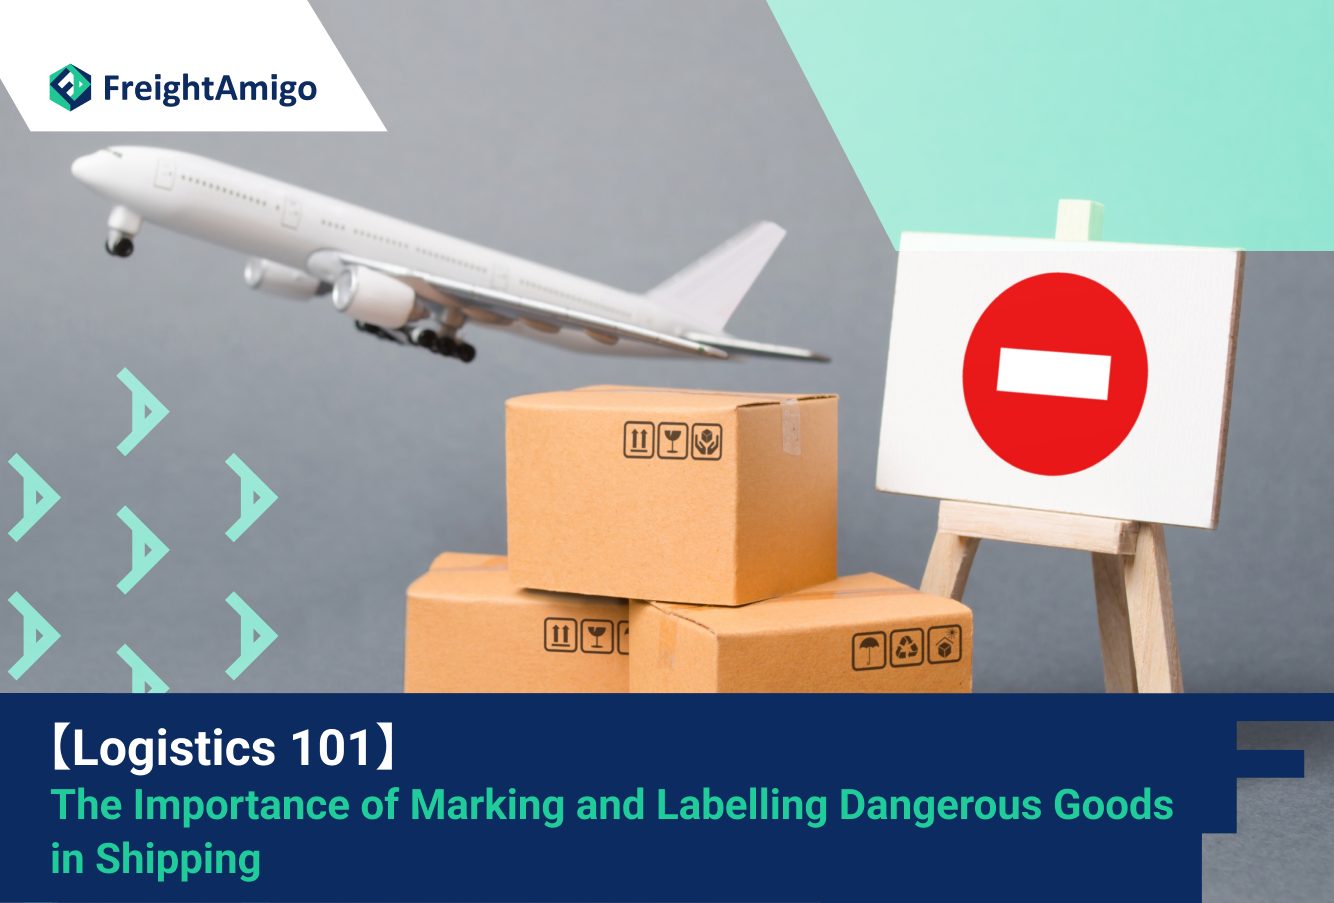 【Logistics 101】The Importance of Marking and Labelling Dangerous Goods in Shipping